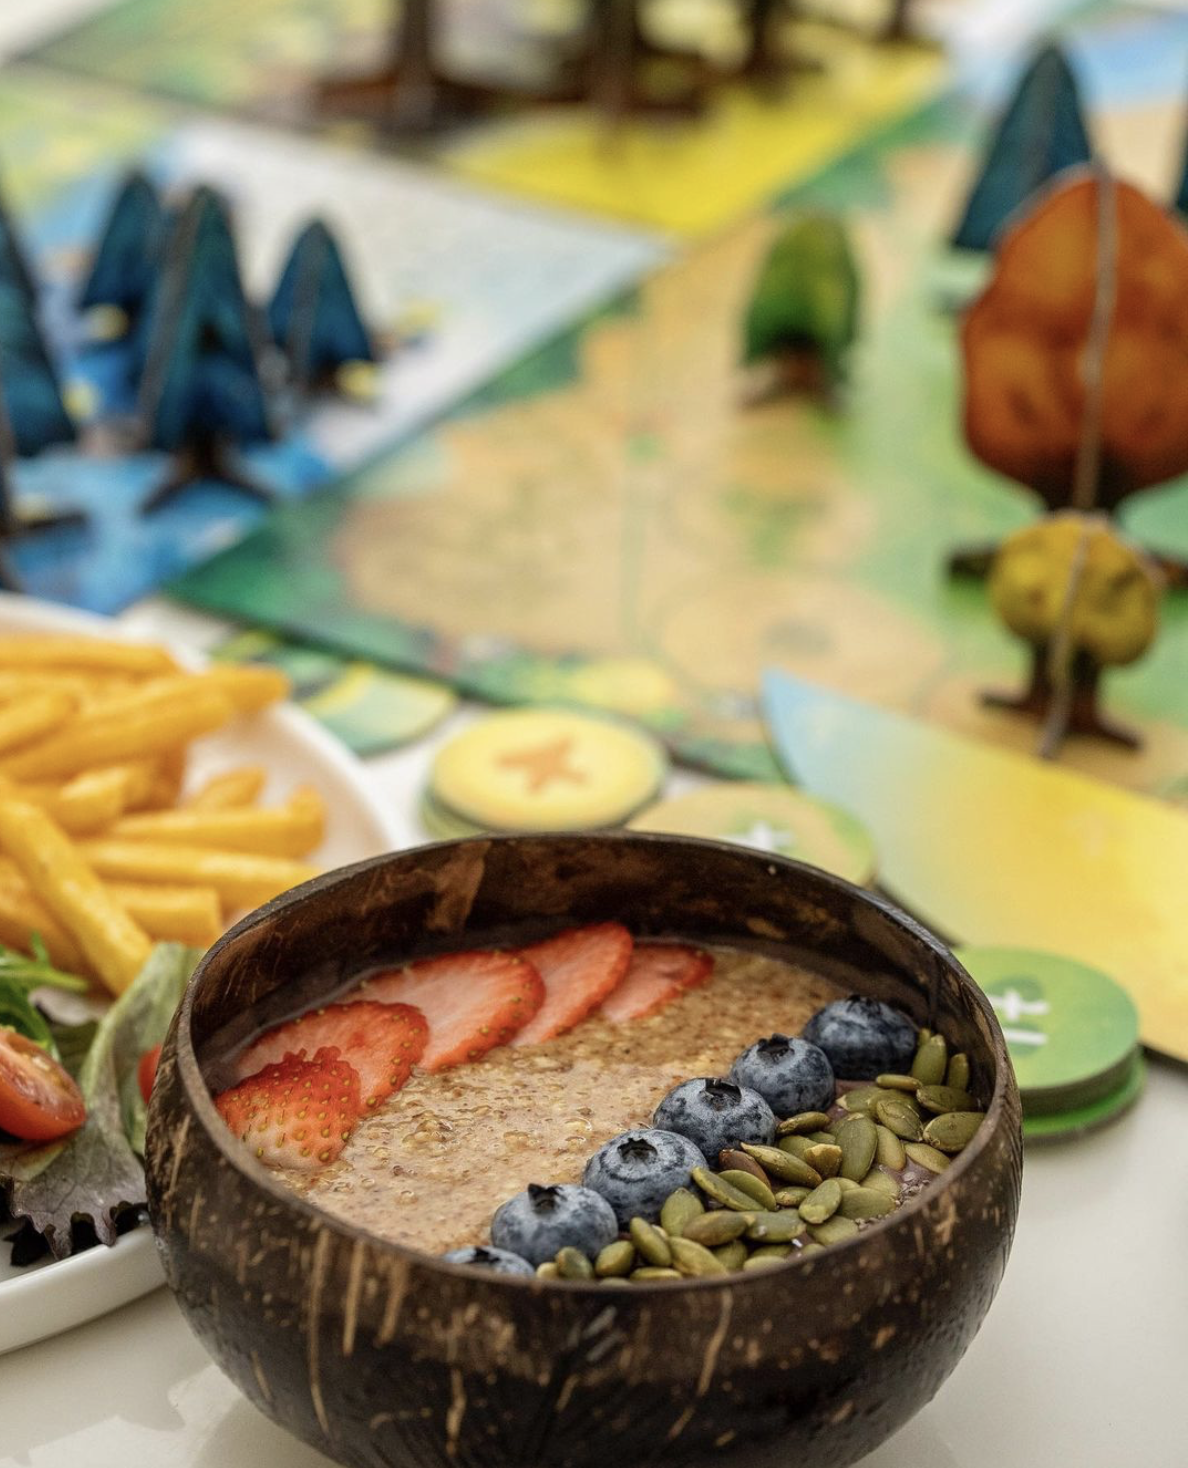 late night board game cafes - Mosanco Settlers Cafe smoothie bowl